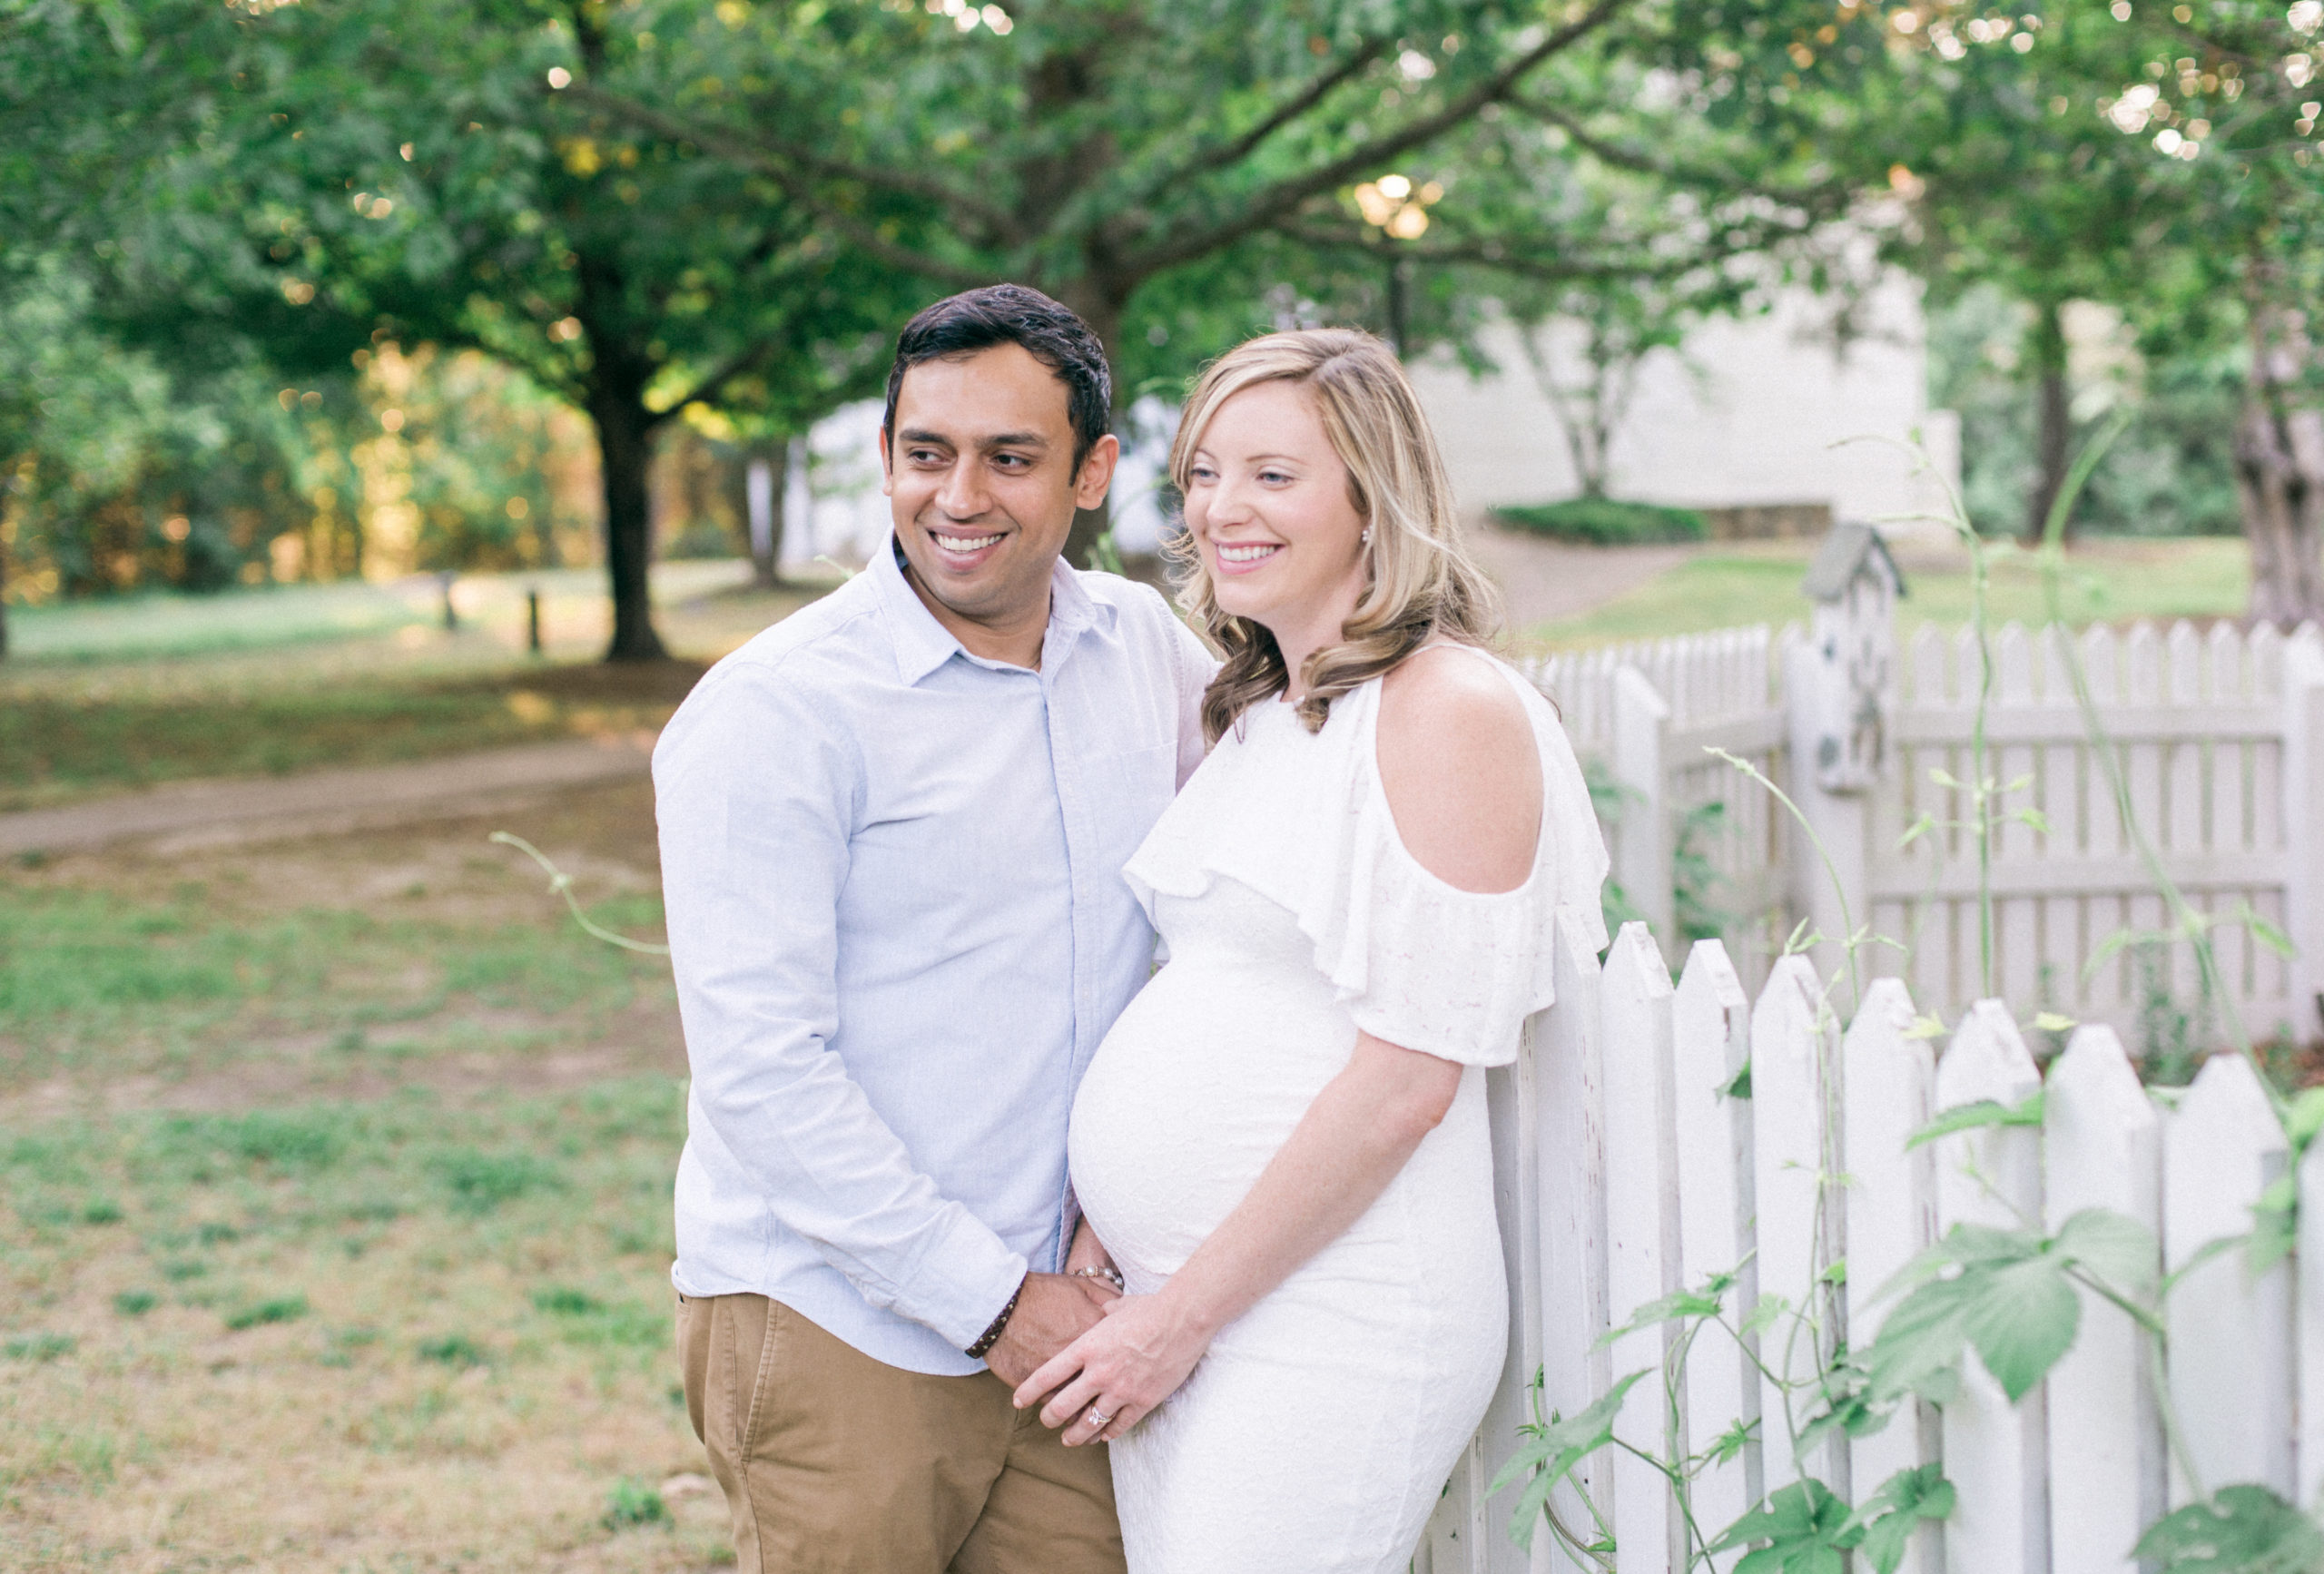 raleigh, nc maternity session